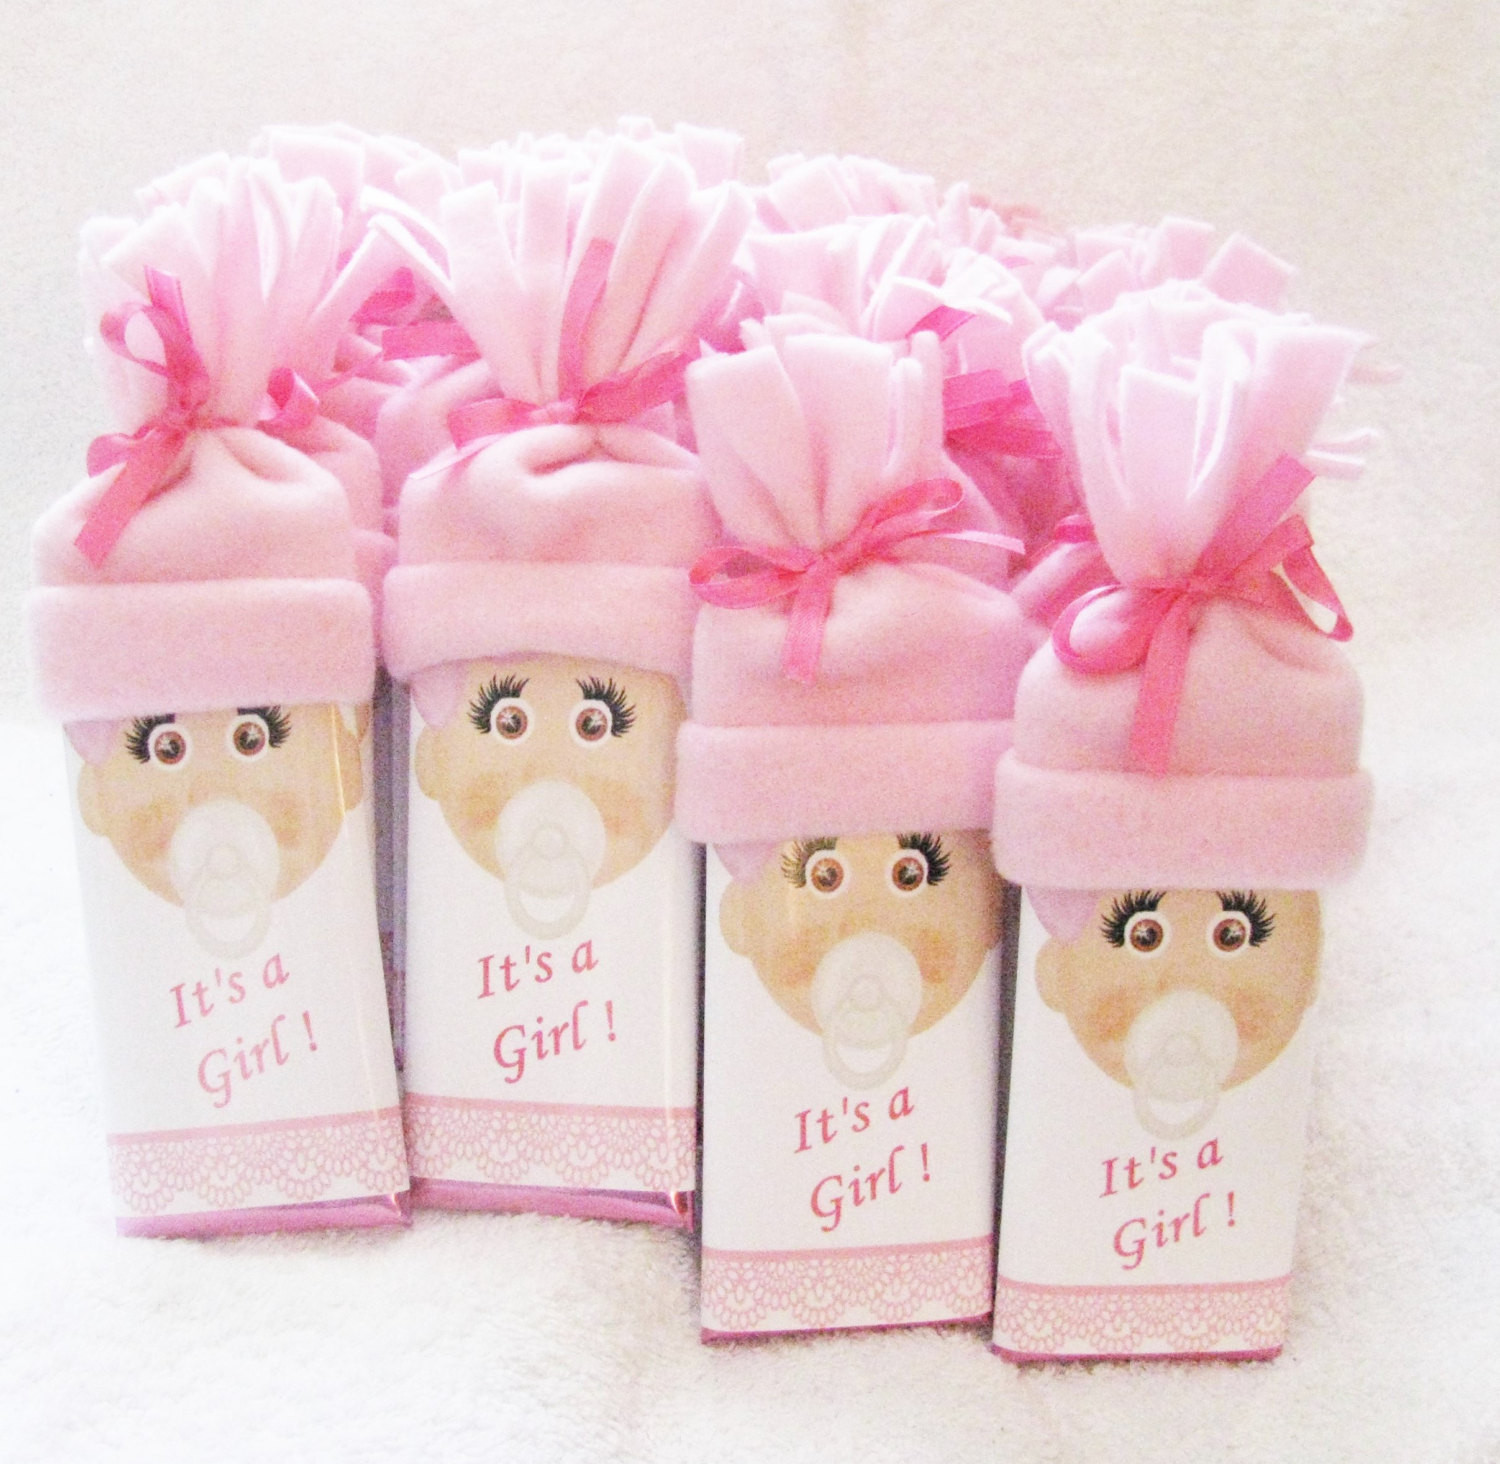 Personalized Baby Shower Party Favor
 Personalized Baby Shower Favor Baby Shower Favors Custom